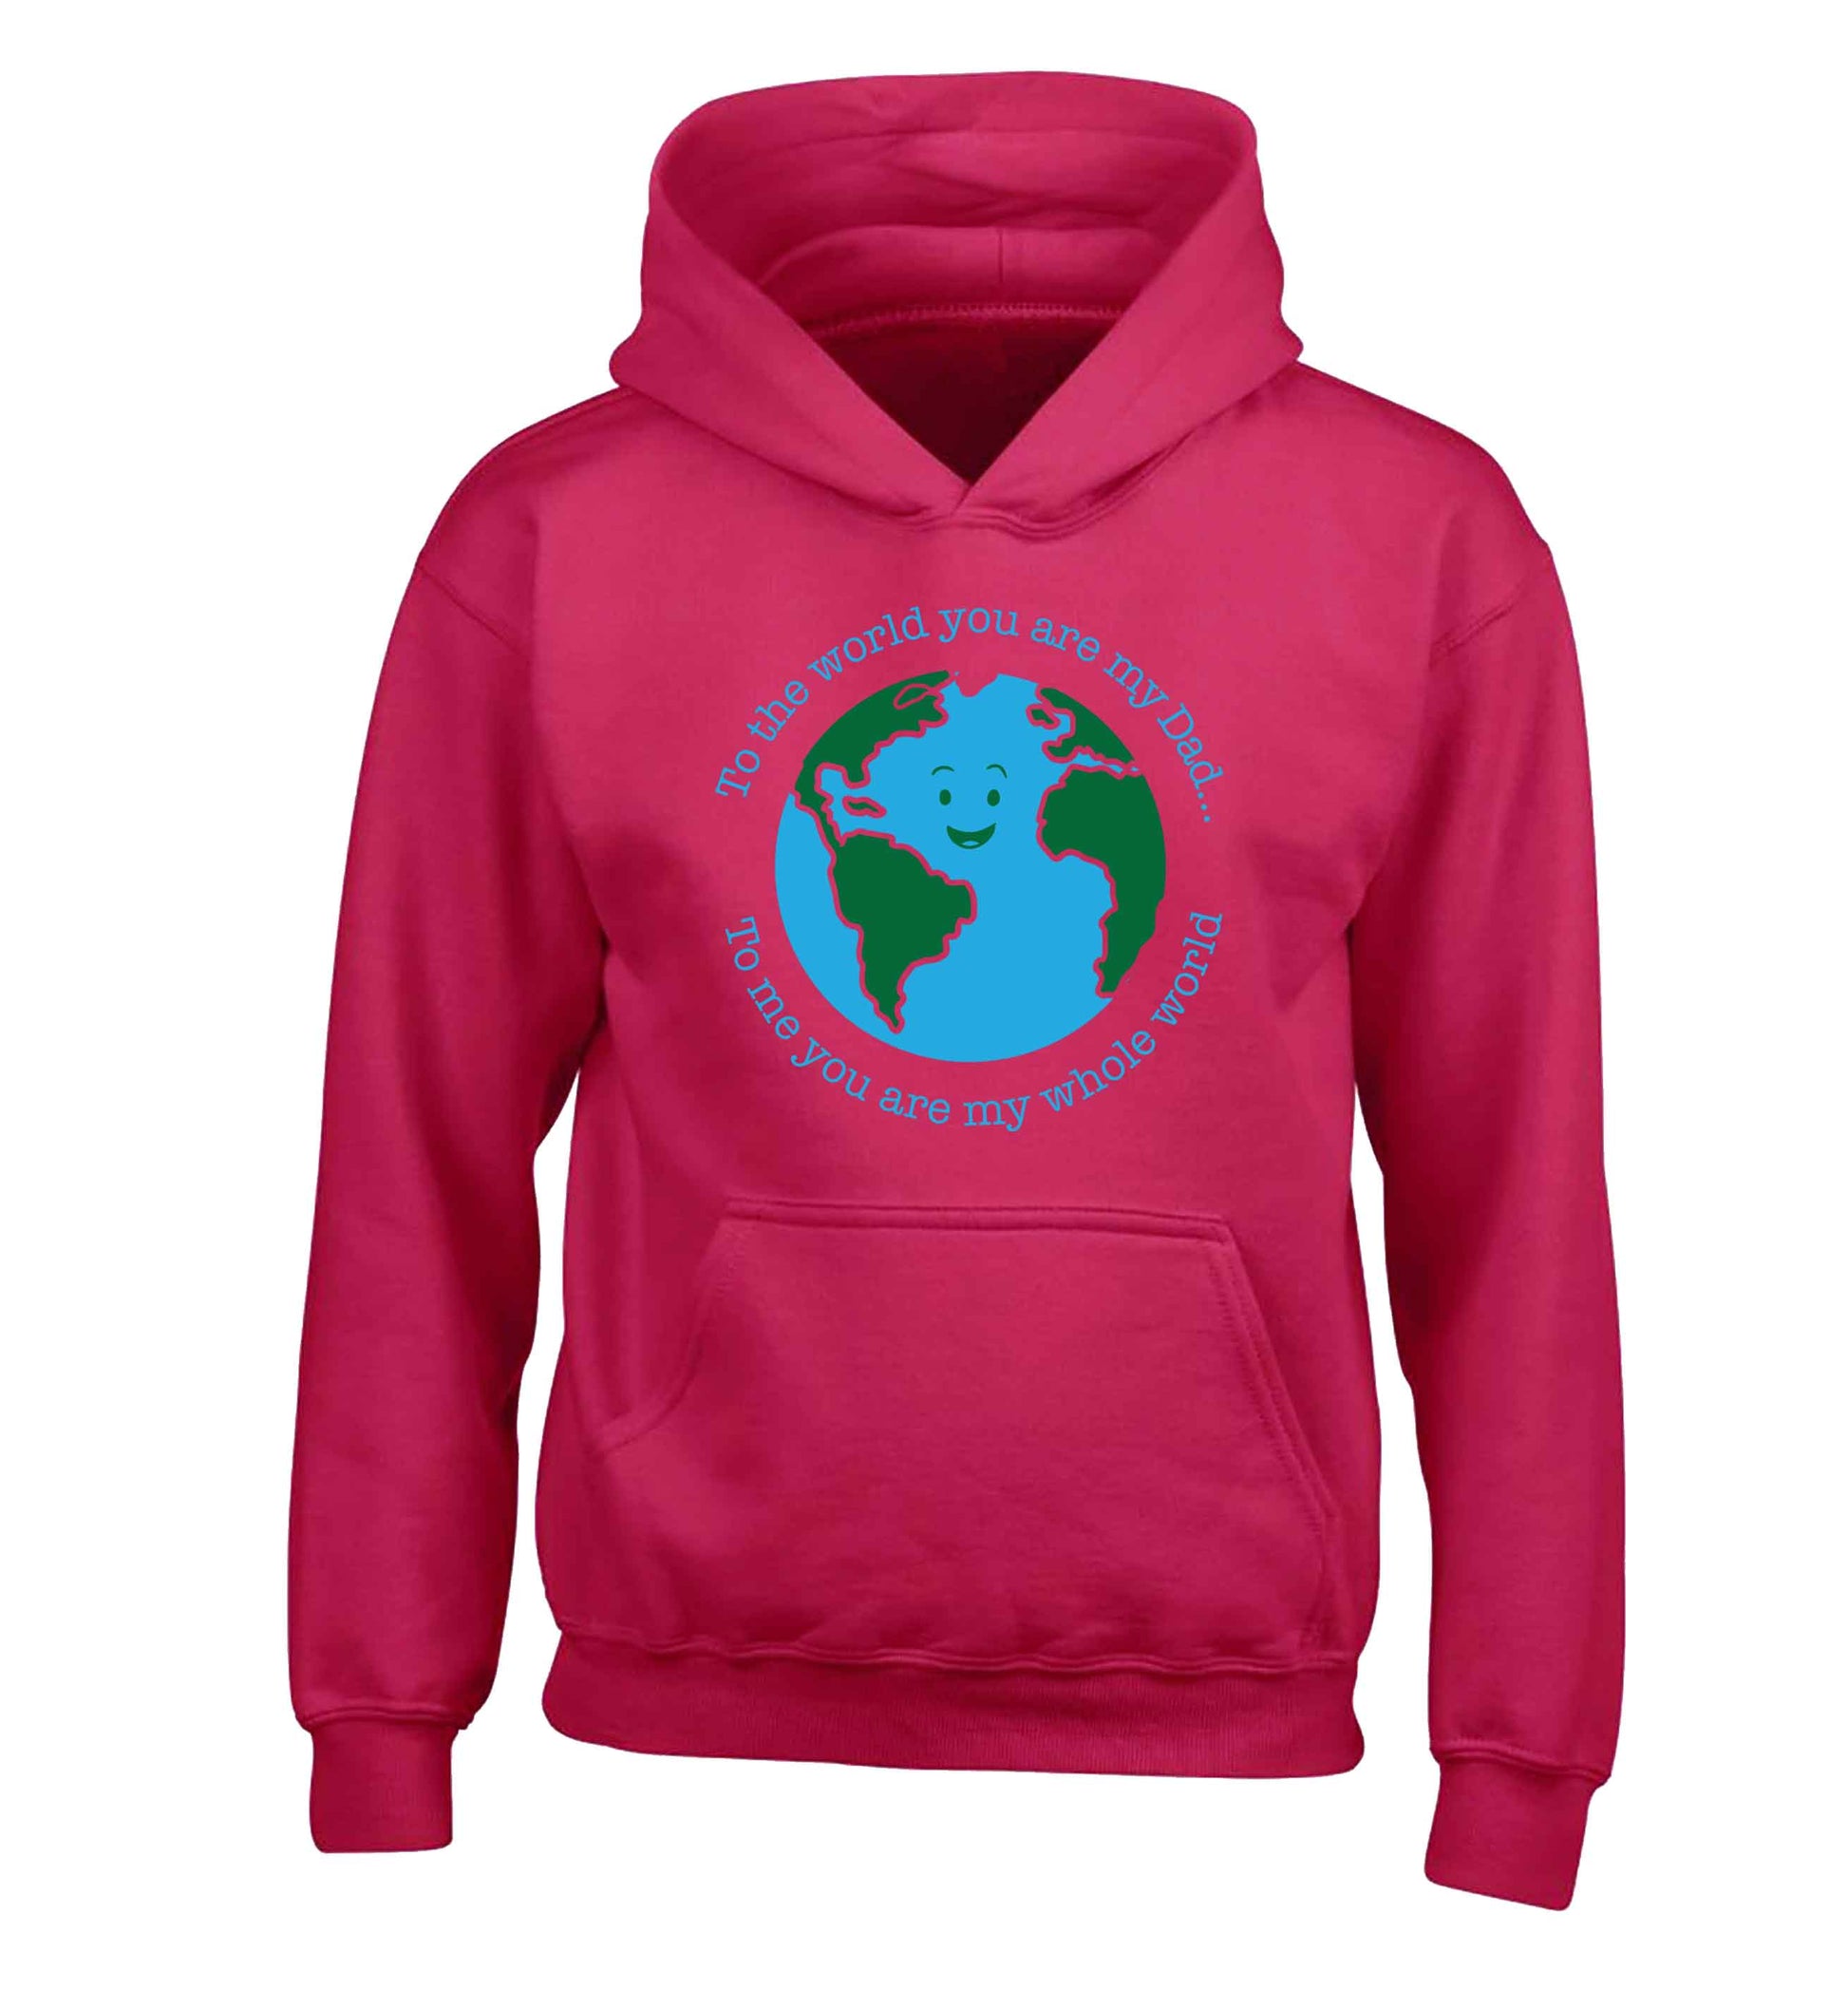 To the world you are my dad, to me you are my whole world children's pink hoodie 12-13 Years